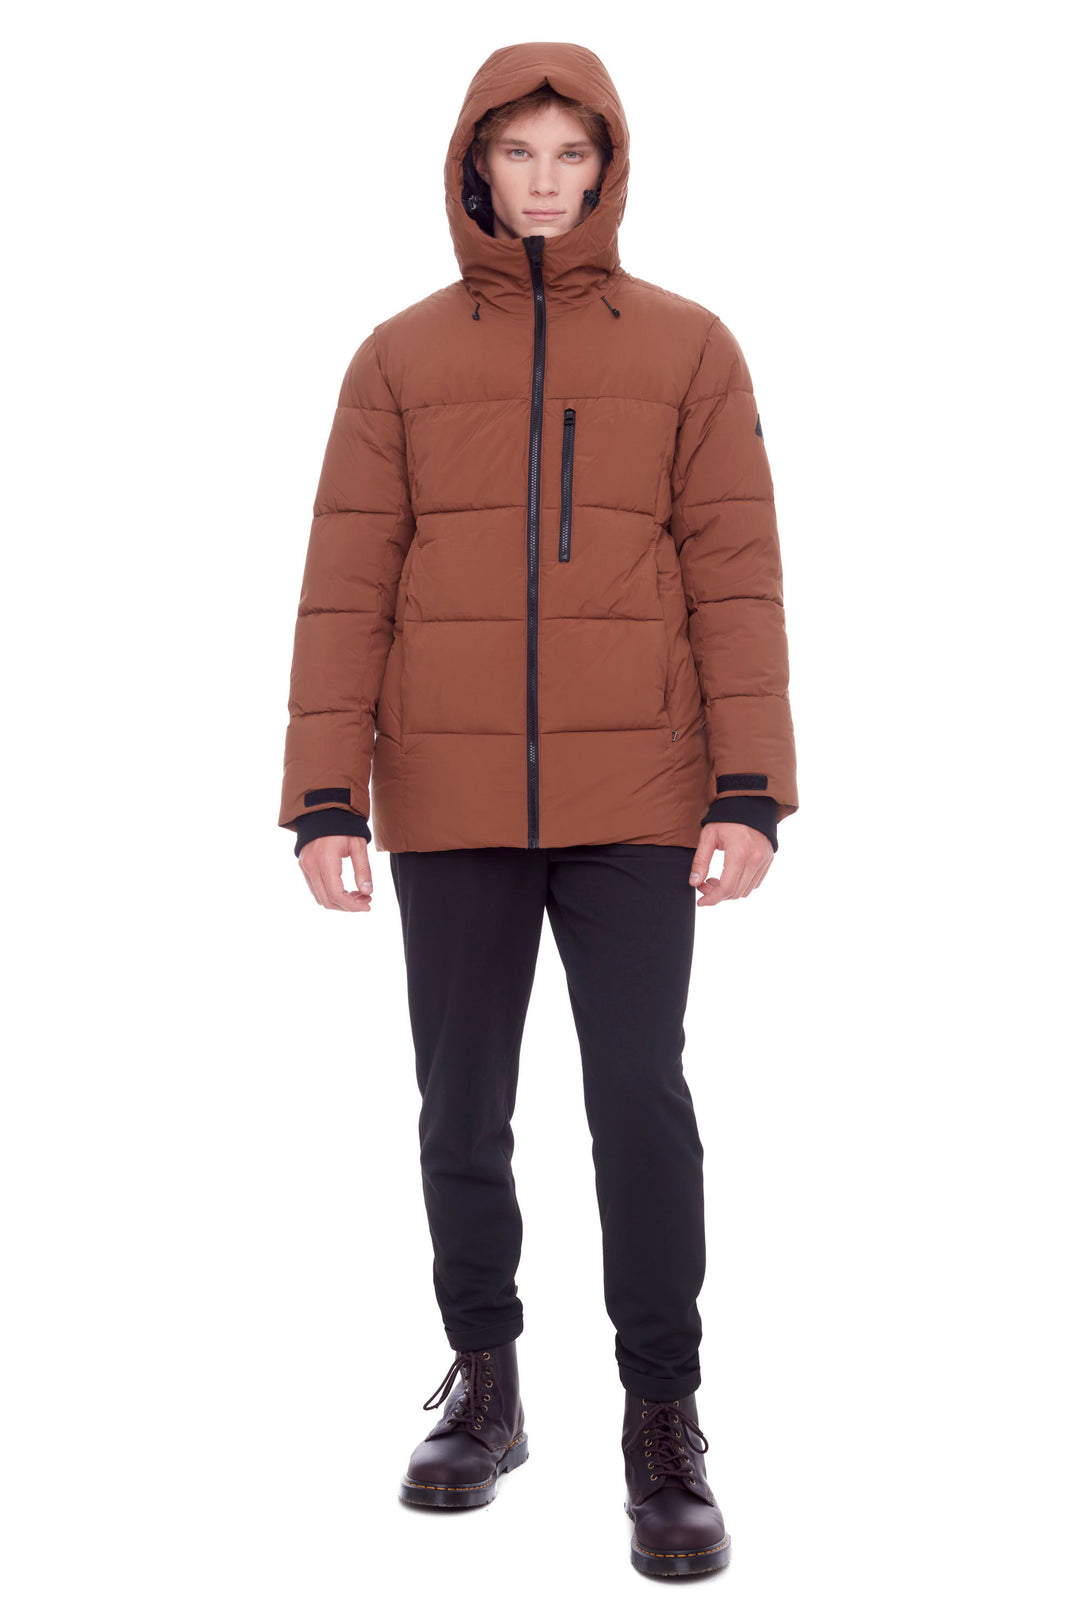 BANFF | MEN'S VEGAN DOWN (RECYCLED) MID-WEIGHT QUILTED PUFFER JACKET, MAPLE